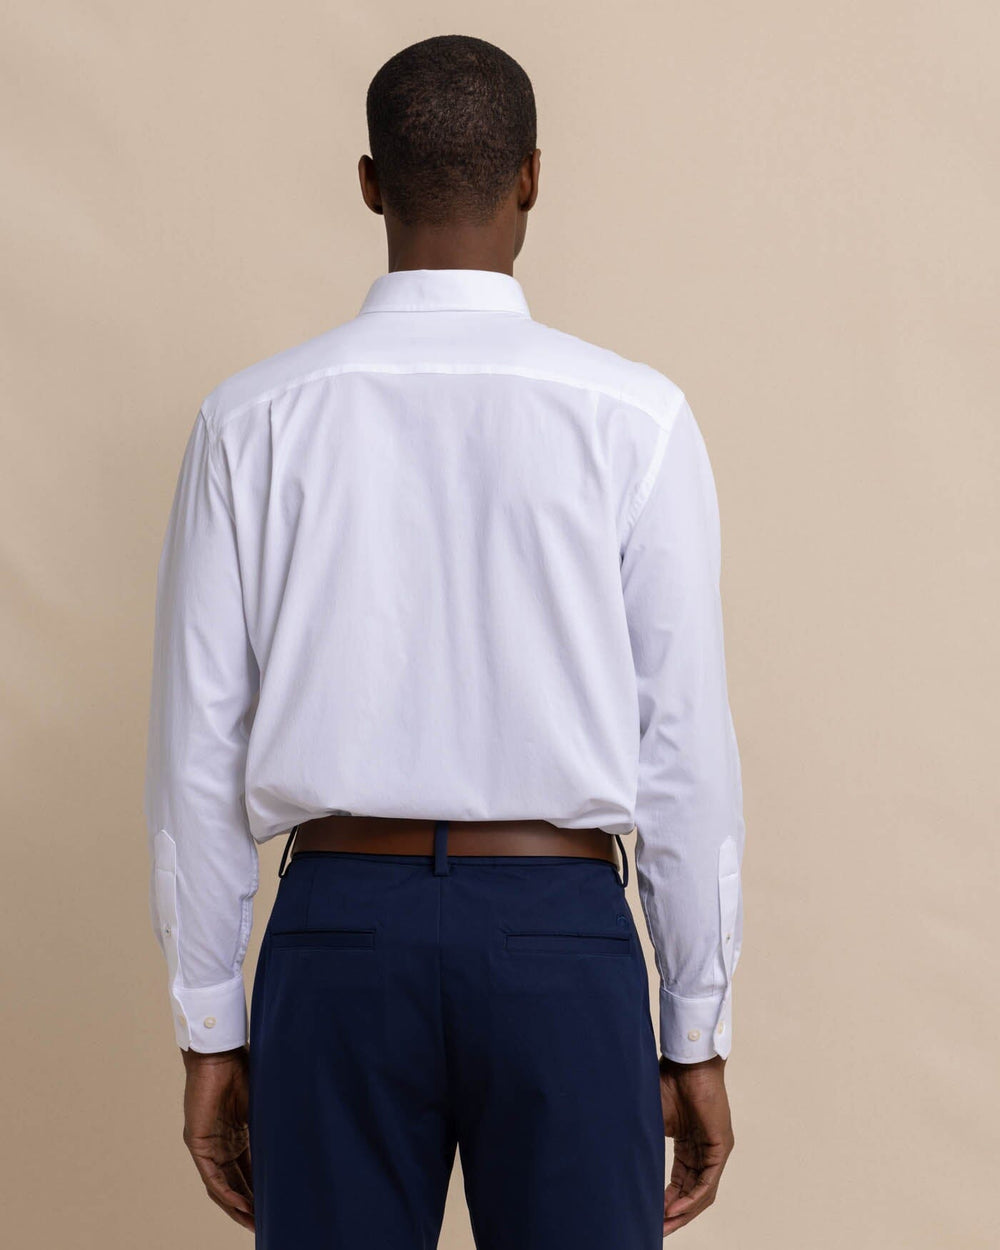 The back view of the Southern Tide Solid brrr°® Intercoastal Performance Sport Shirt by Southern Tide - Classic White